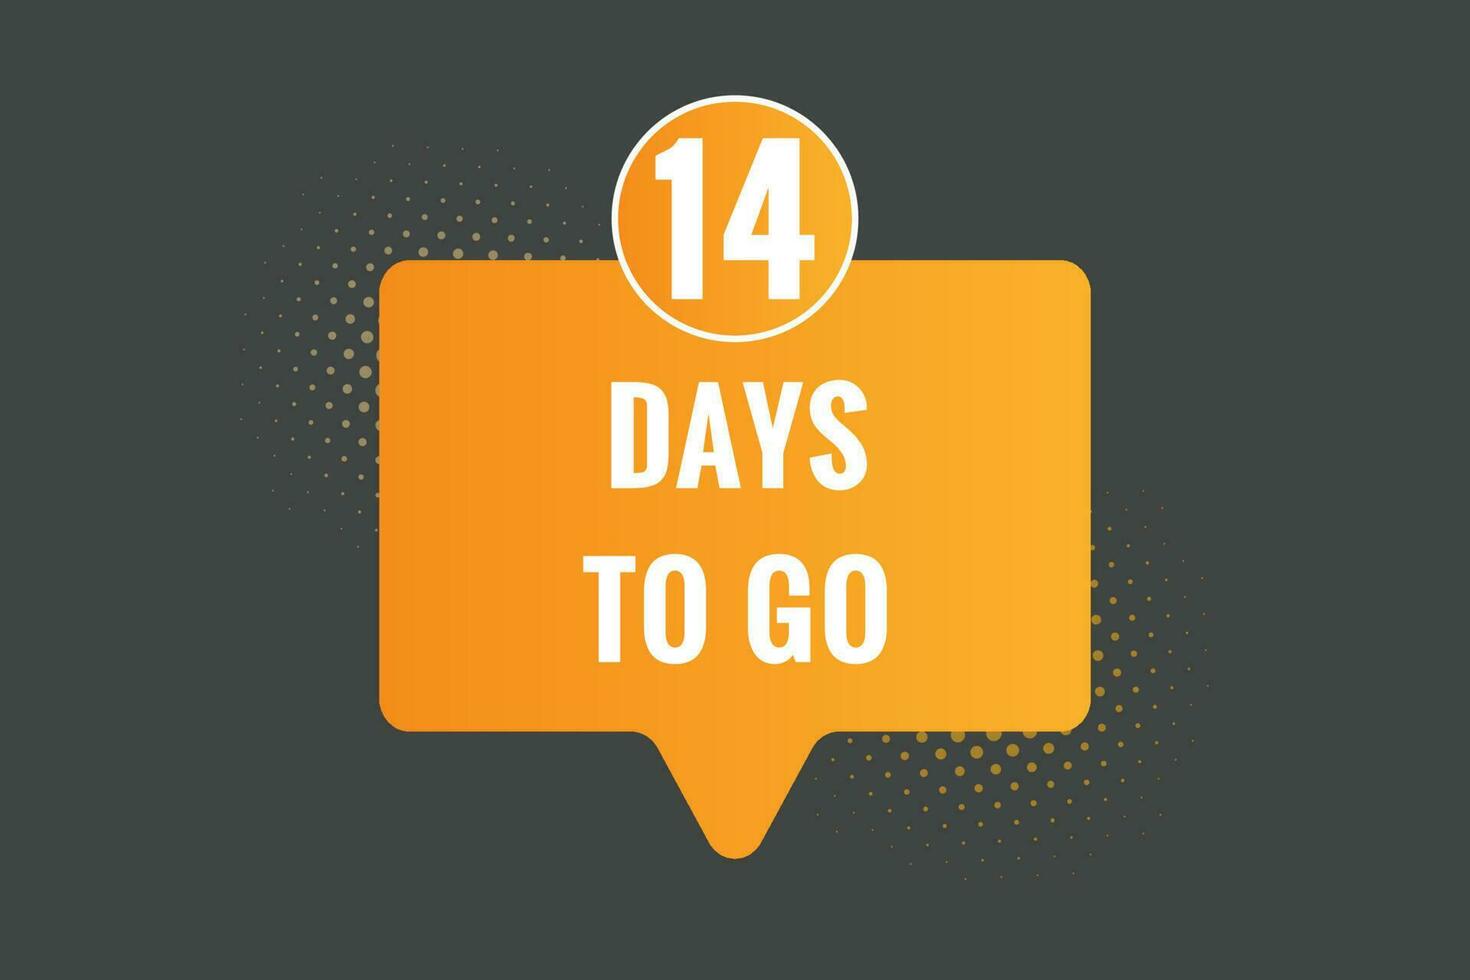 14 days to go text web button. Countdown left 14 day to go banner label vector